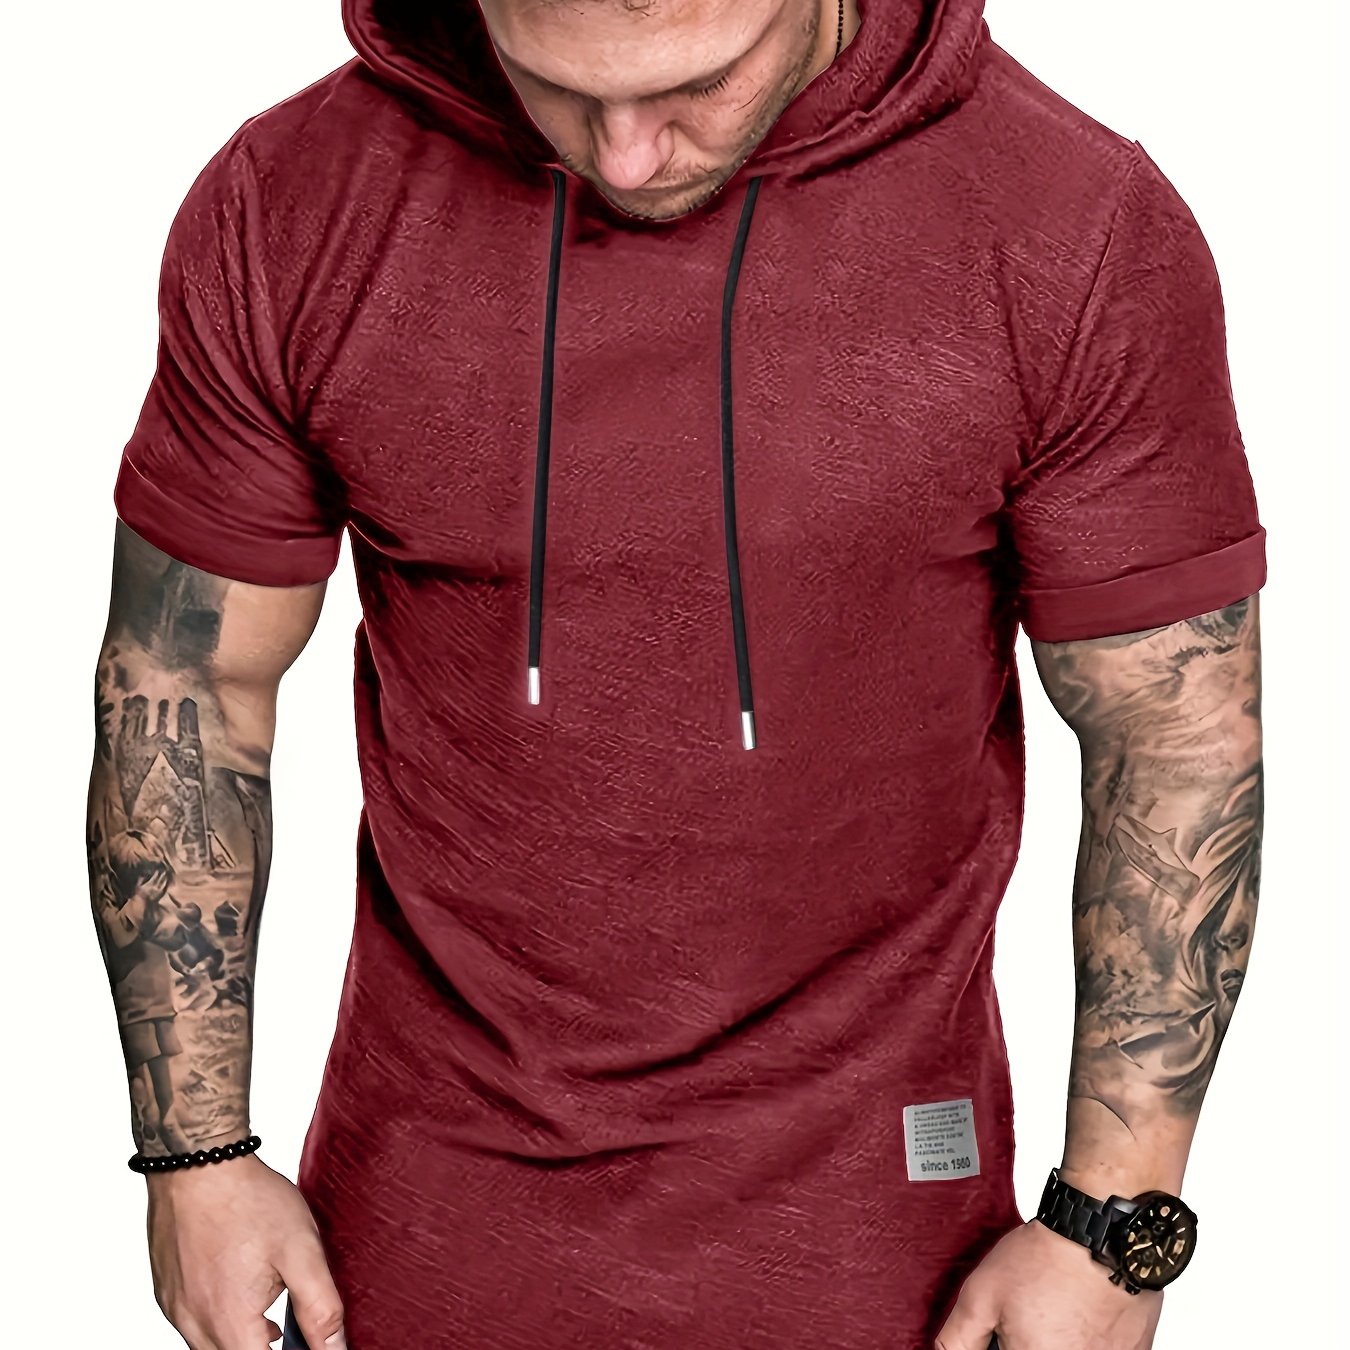 Plus Size Men's Basic Short Sleeve Hooded T-shirt, Summer Comfy Tops With Drawstring